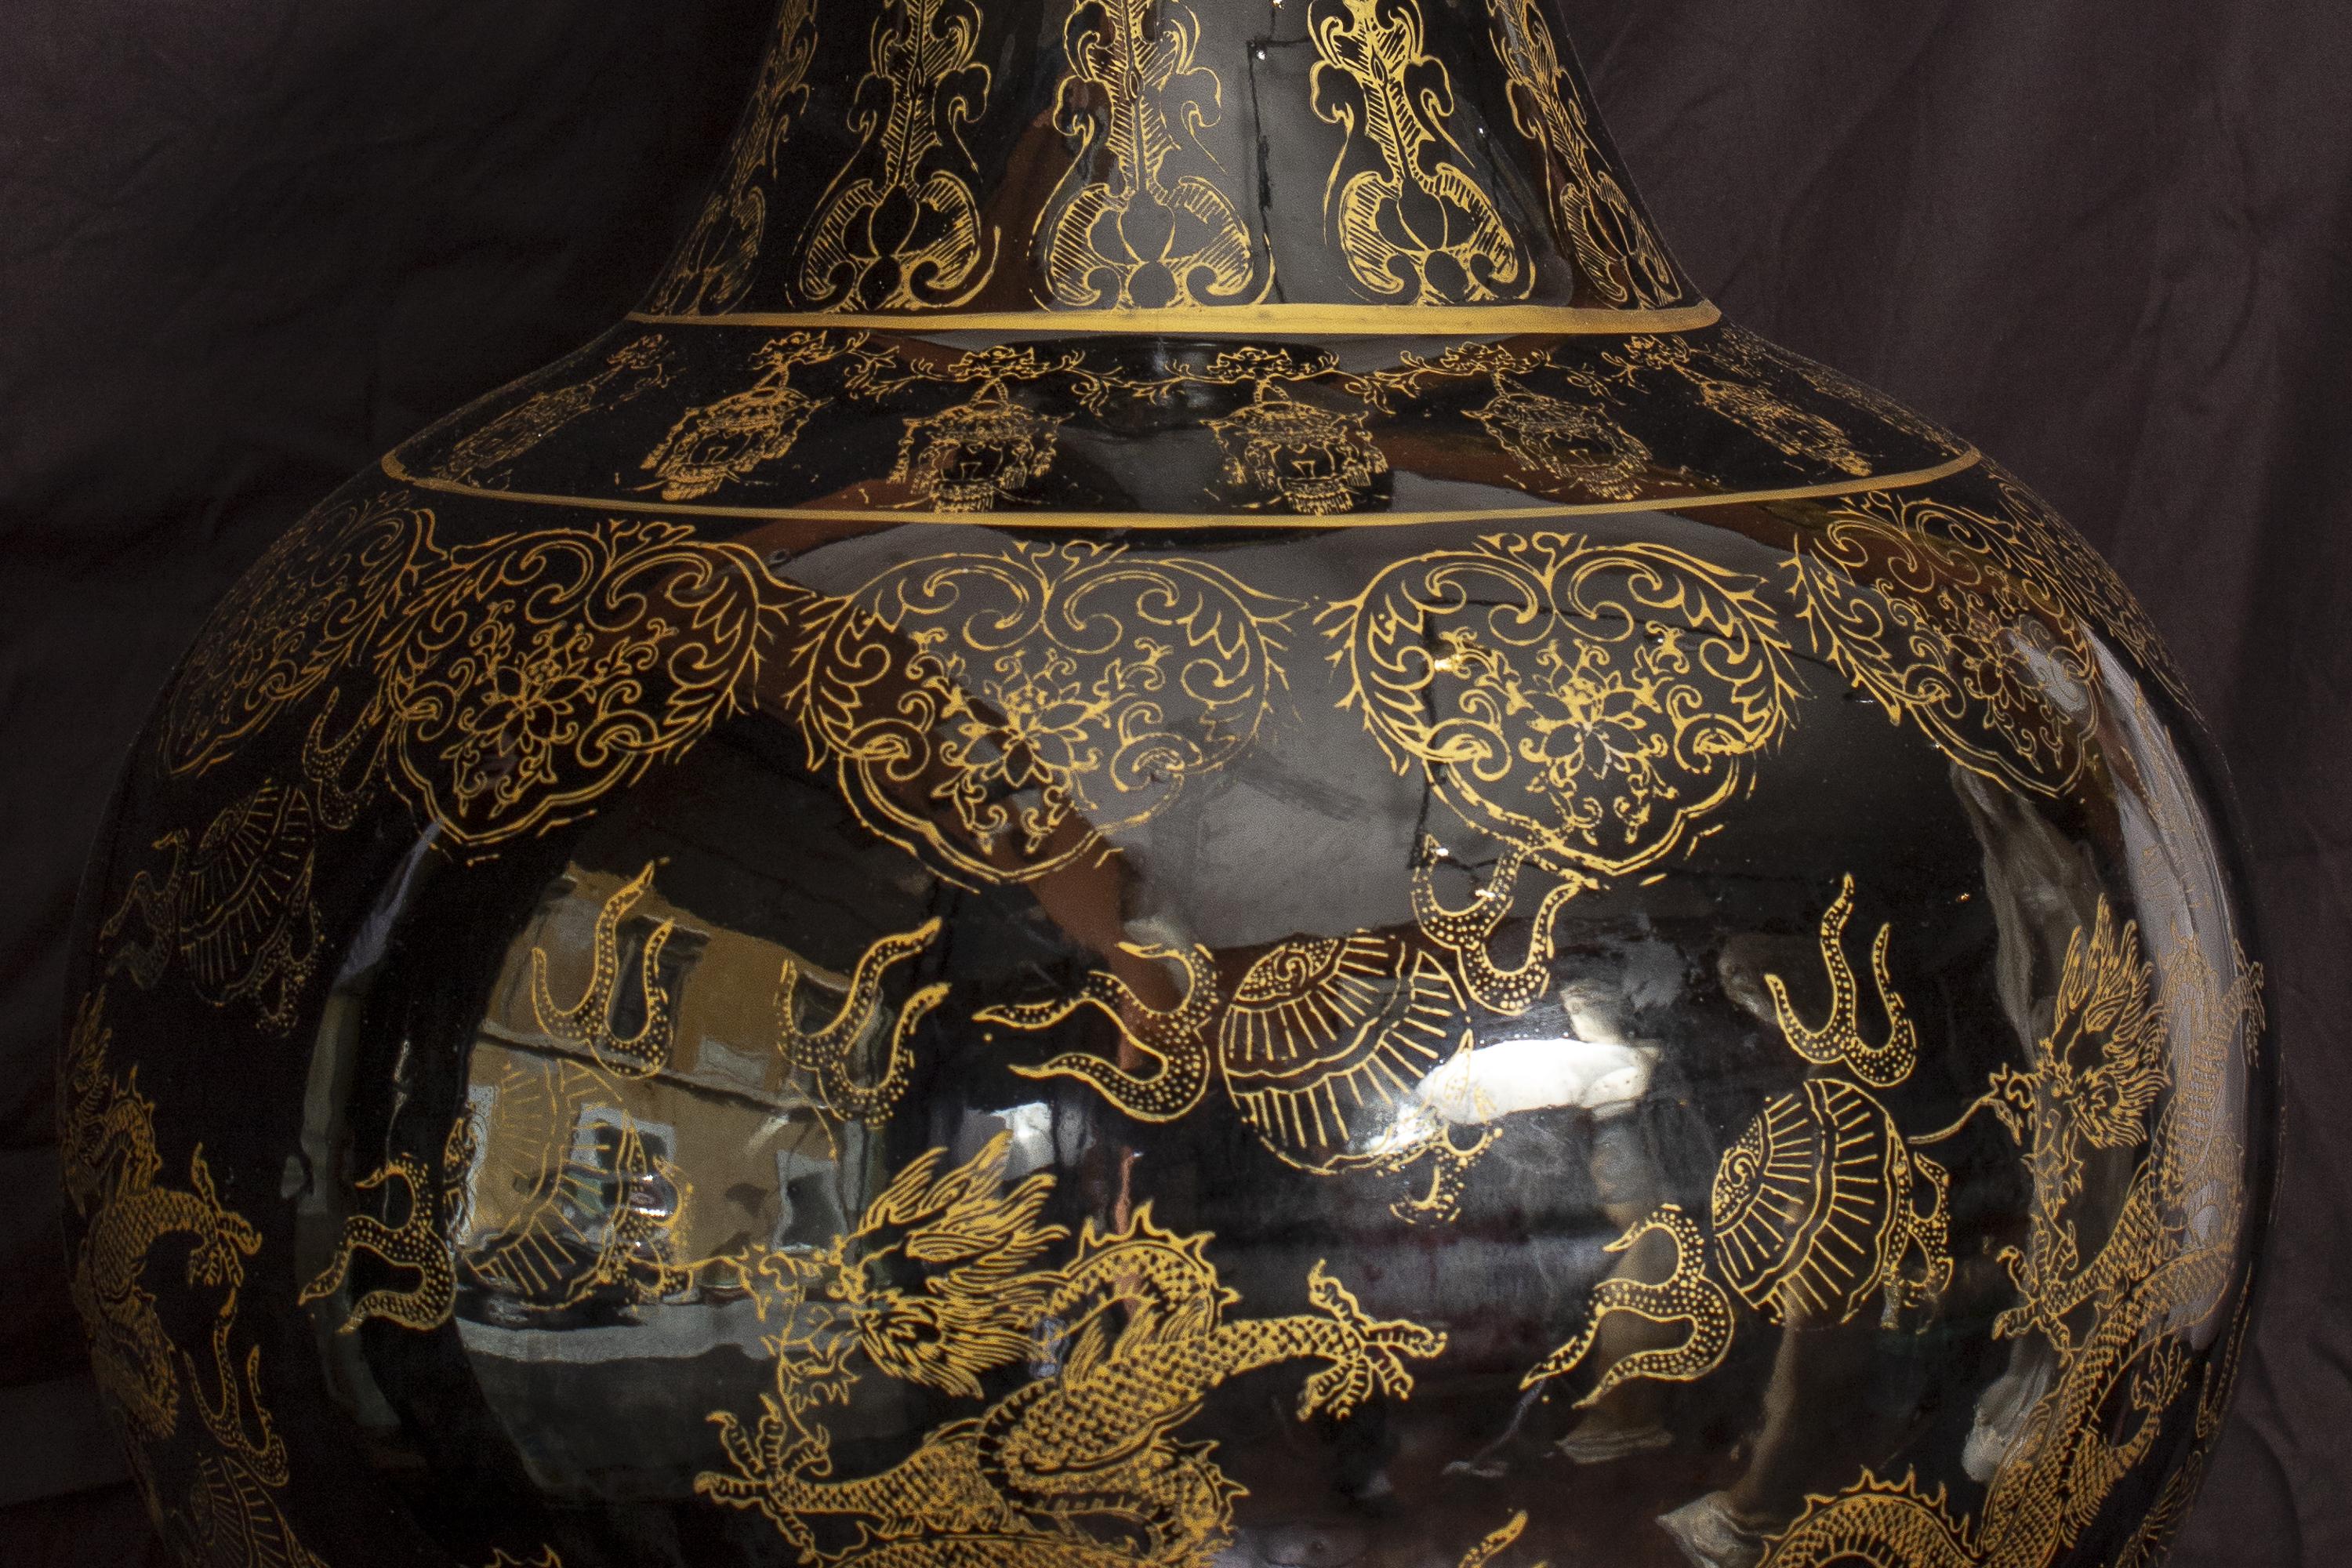 Pair of Large Chinese Porcelain Black and Gilt-Decorated Vases 15